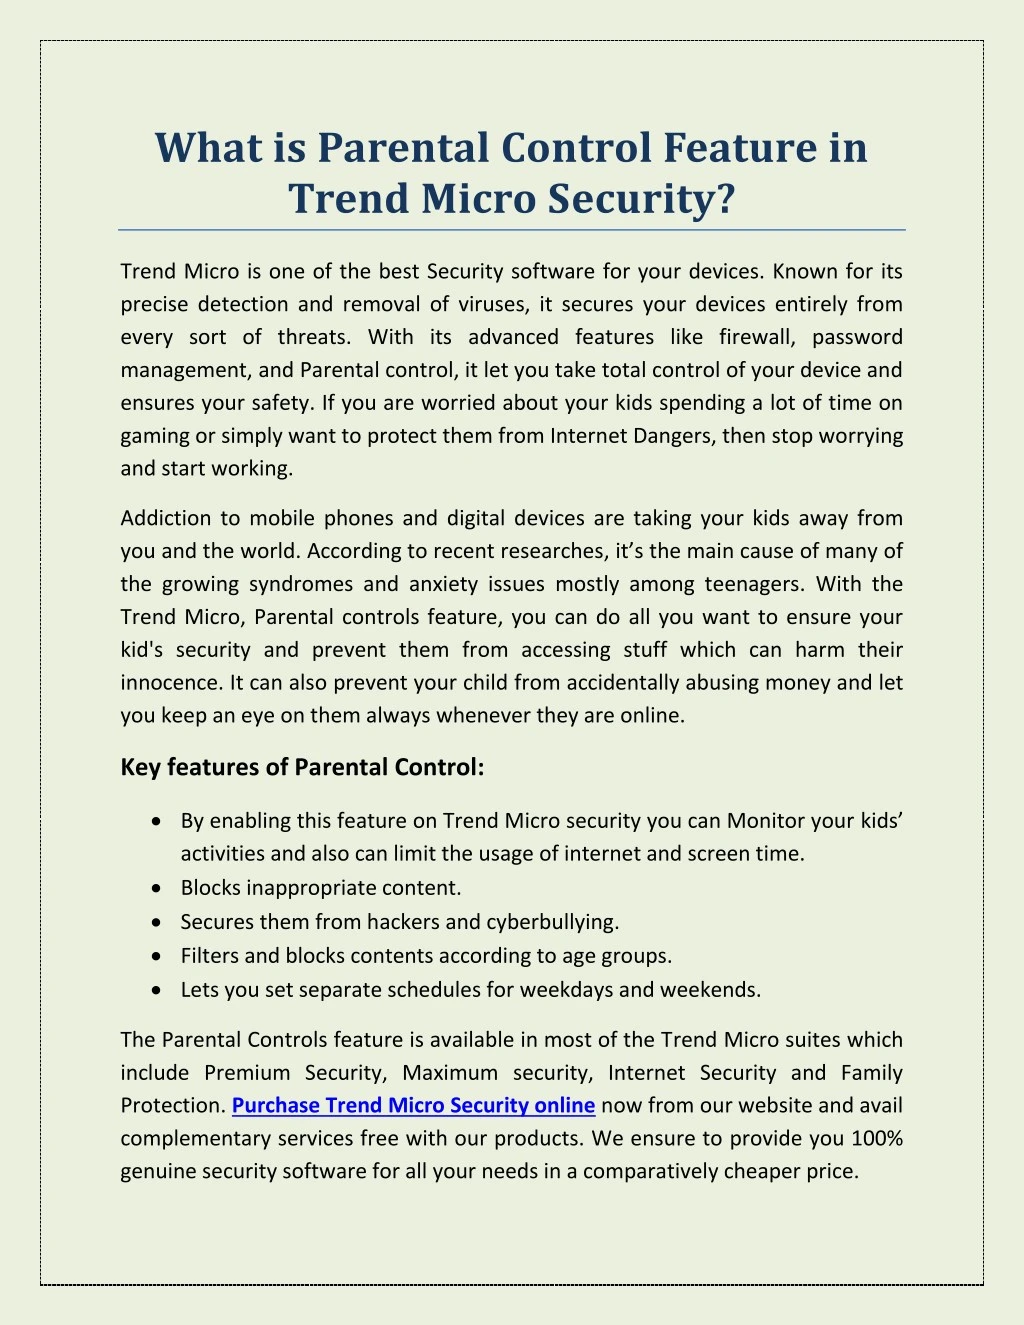 what is parental control feature in trend micro